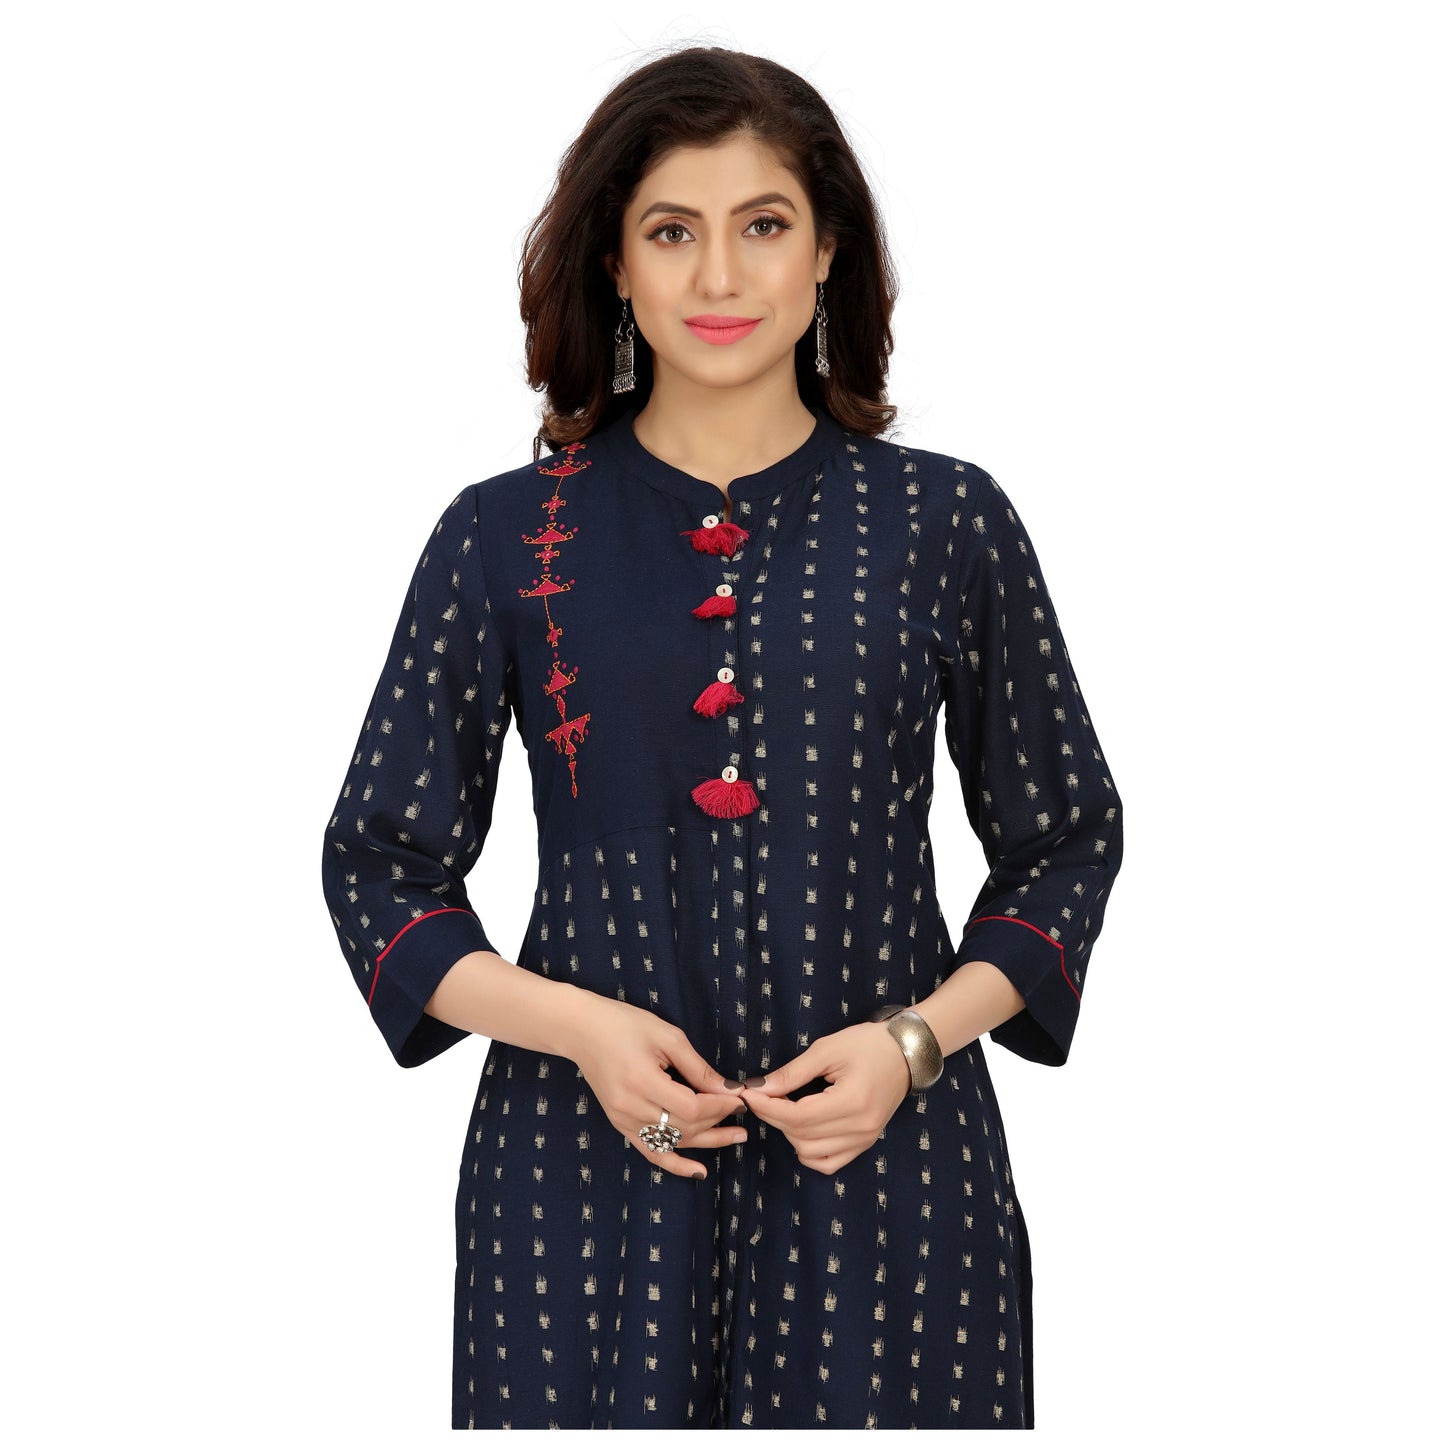 Beautiful Ikkat prints on this stylish Kurta for women. Indian tunic top can be worn with jeans or leggings. 